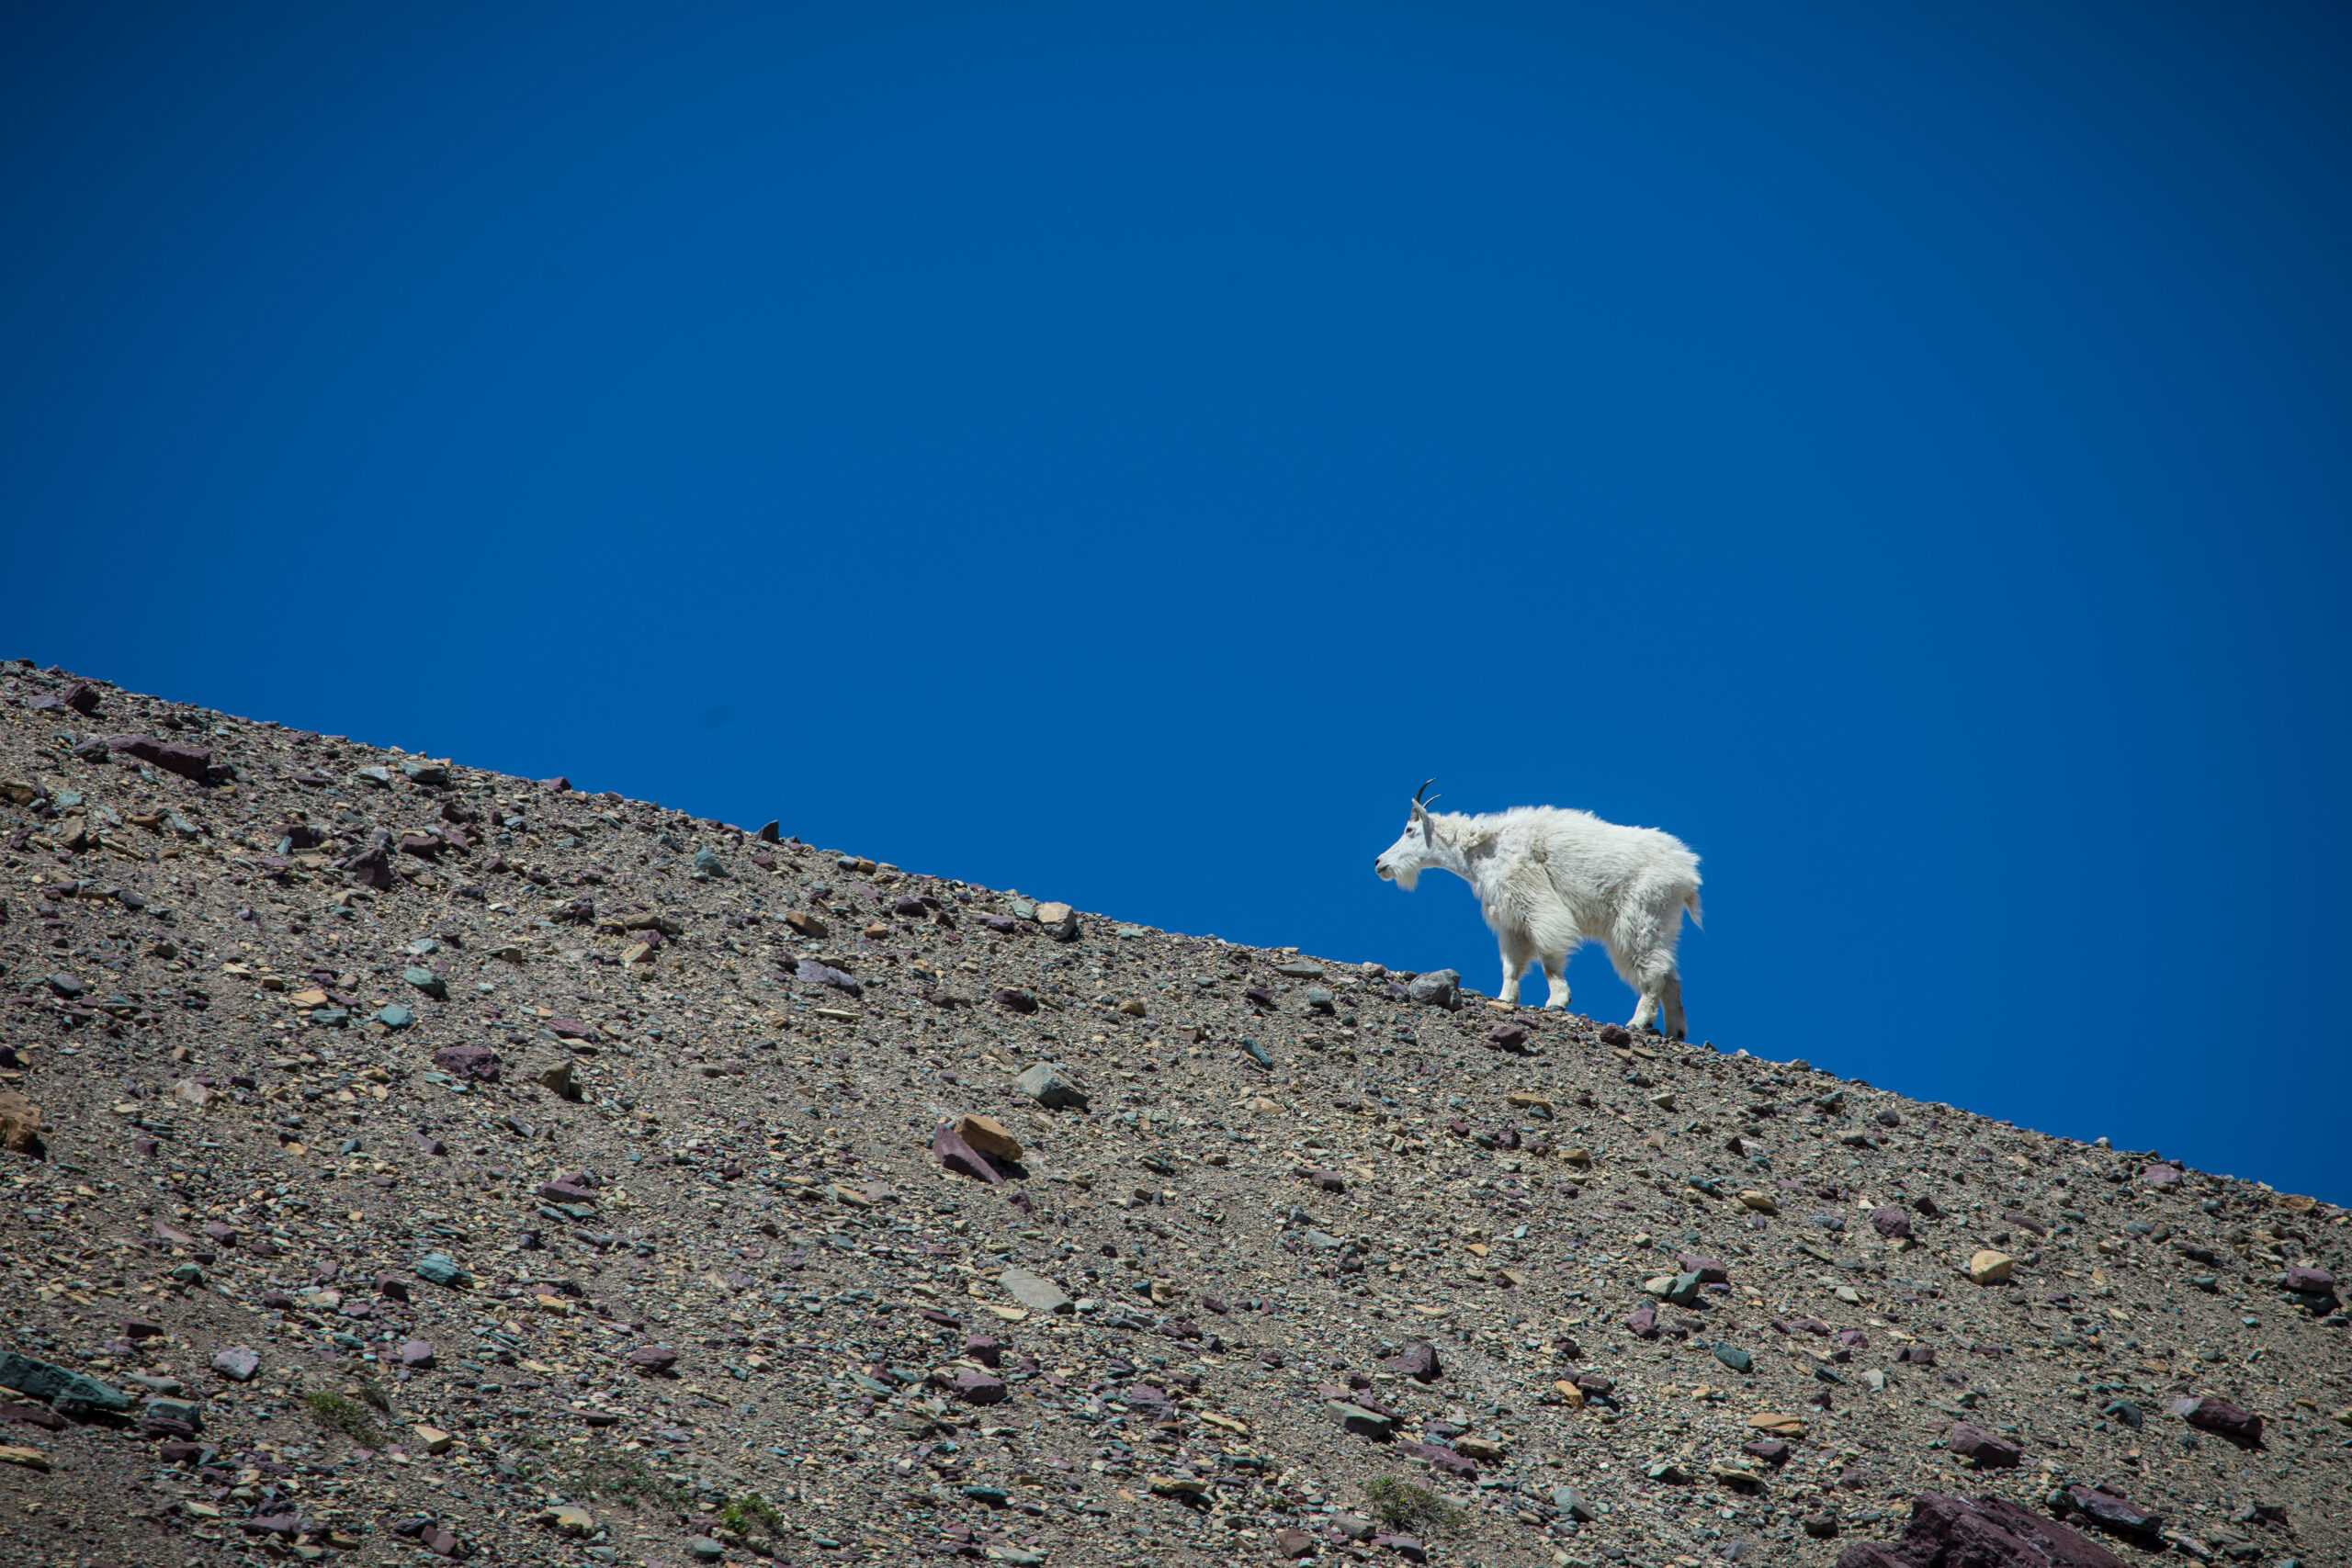 It's rare to hear of a mountain goat killing a grizzly in defense, but it does happen.